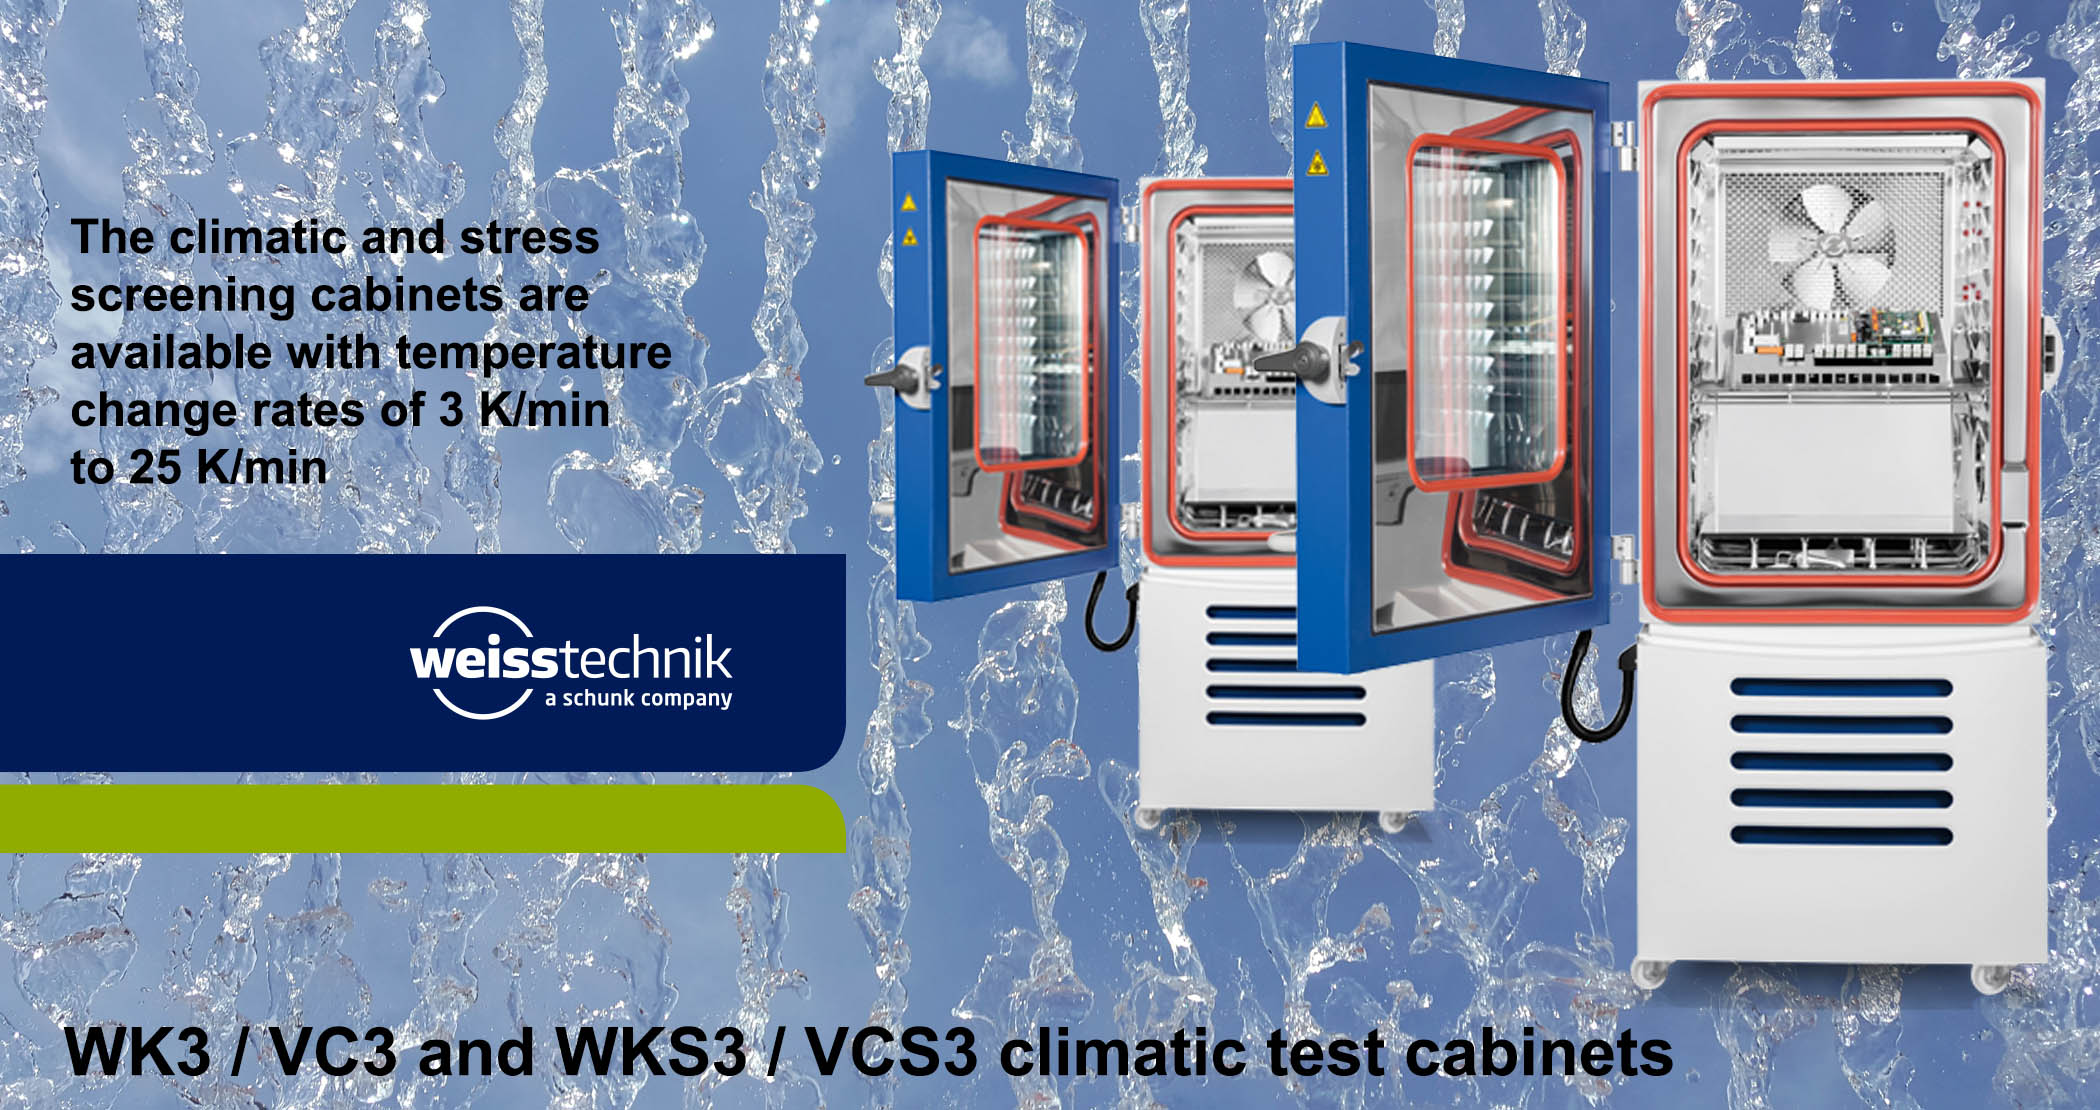 WK3, VC3, WKS3, VCS3 climatic and stress screening cabinets